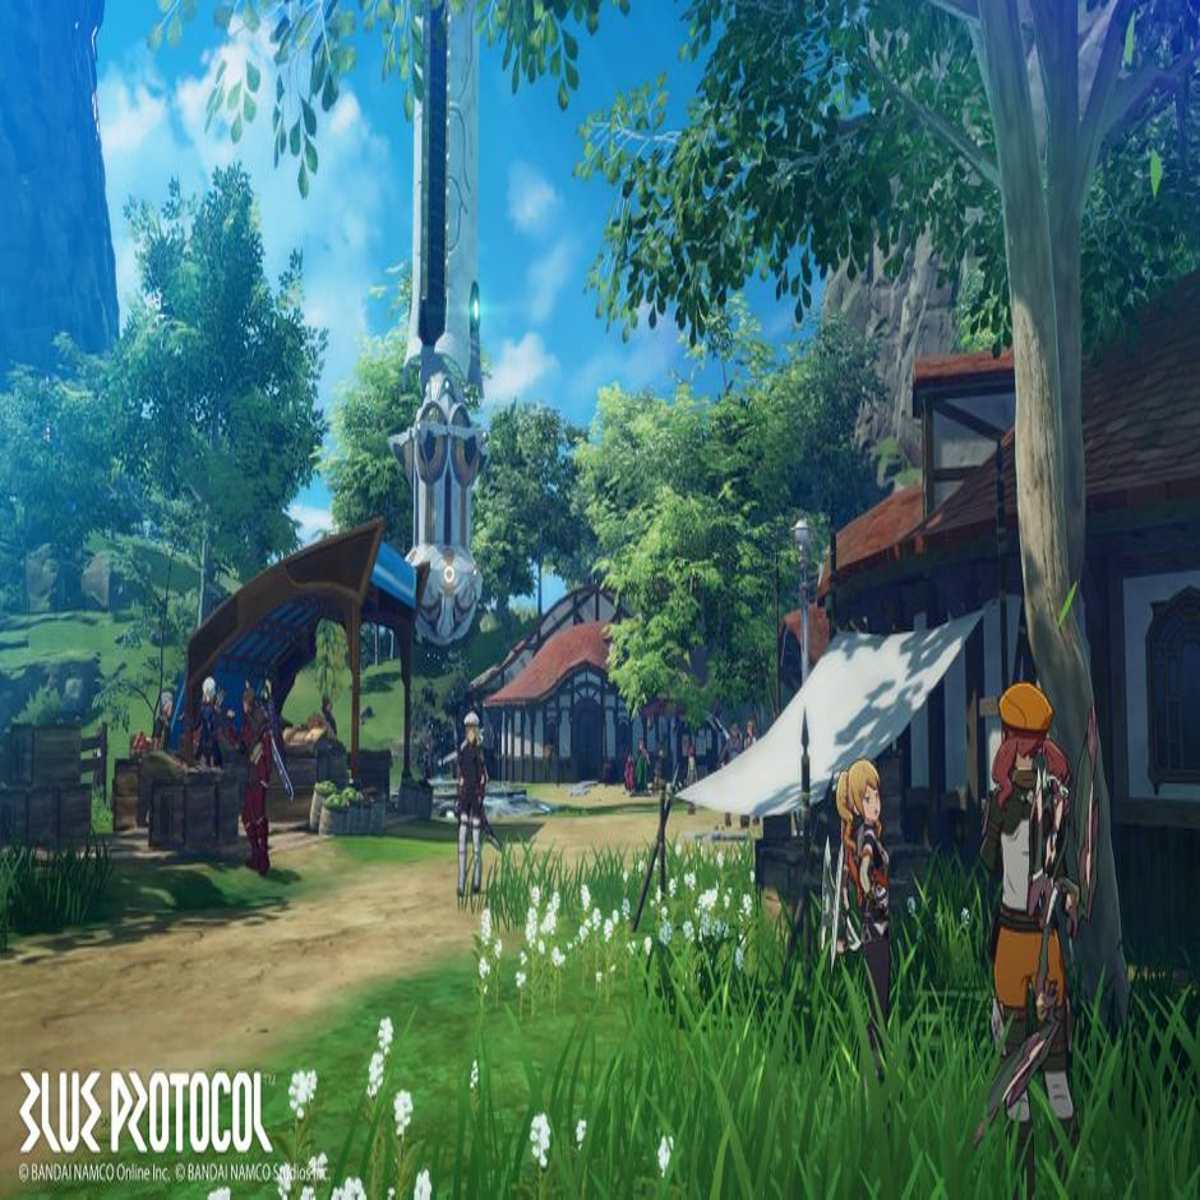 Blue Protocol, the free-to-play anime MMORPG, is coming West in 2023